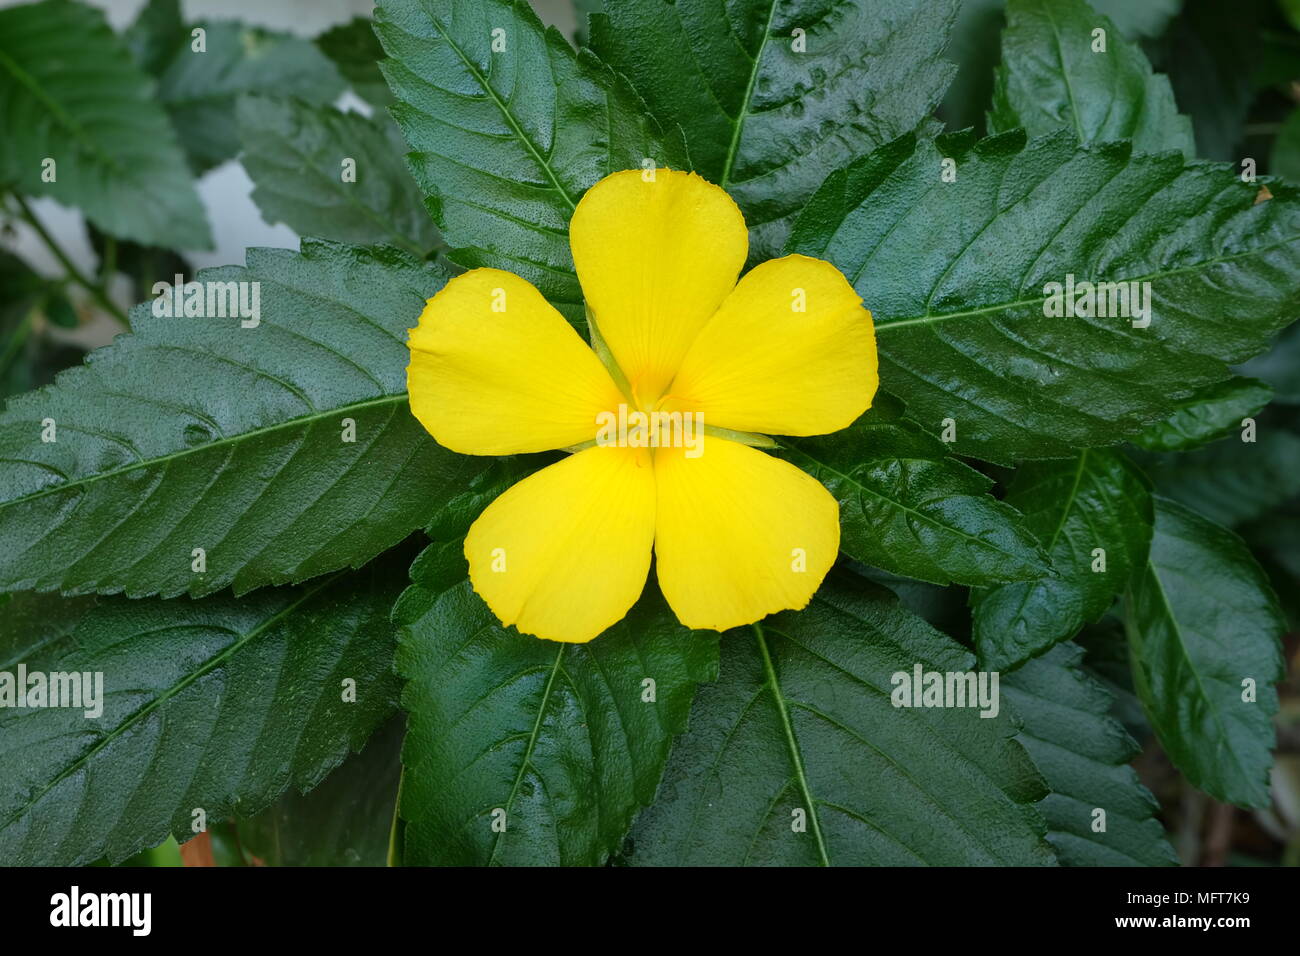 West Indian Holly Flower. Stock Photo